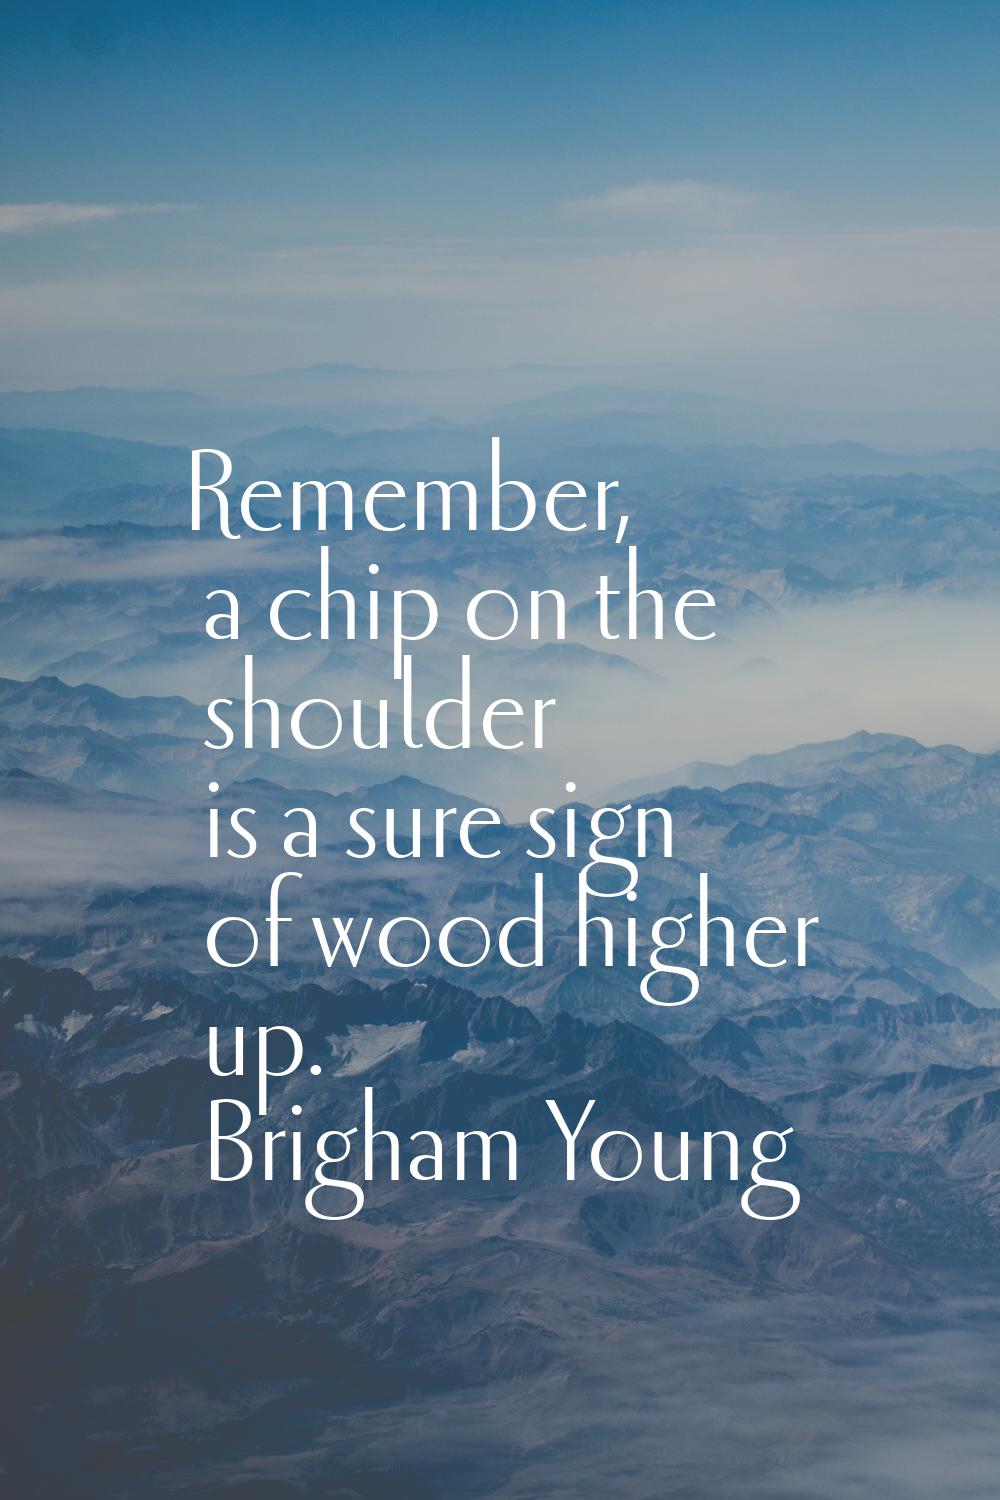 Remember, a chip on the shoulder is a sure sign of wood higher up.